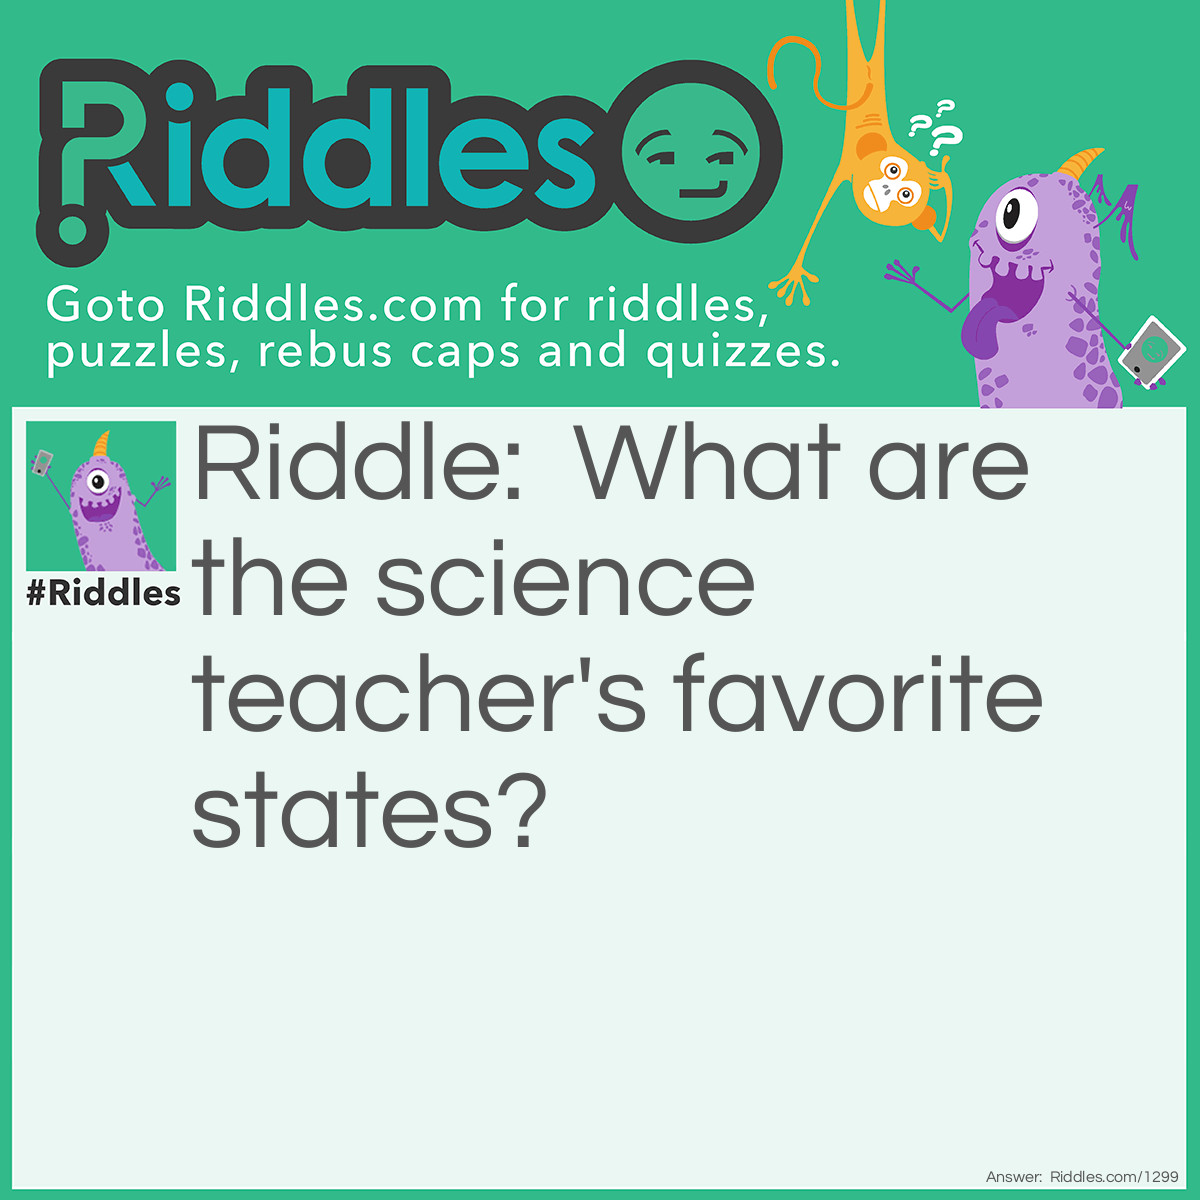 Riddle: What are the science teacher's favorite states? Answer: Solid, Liquid, Gas. The states of all matter.